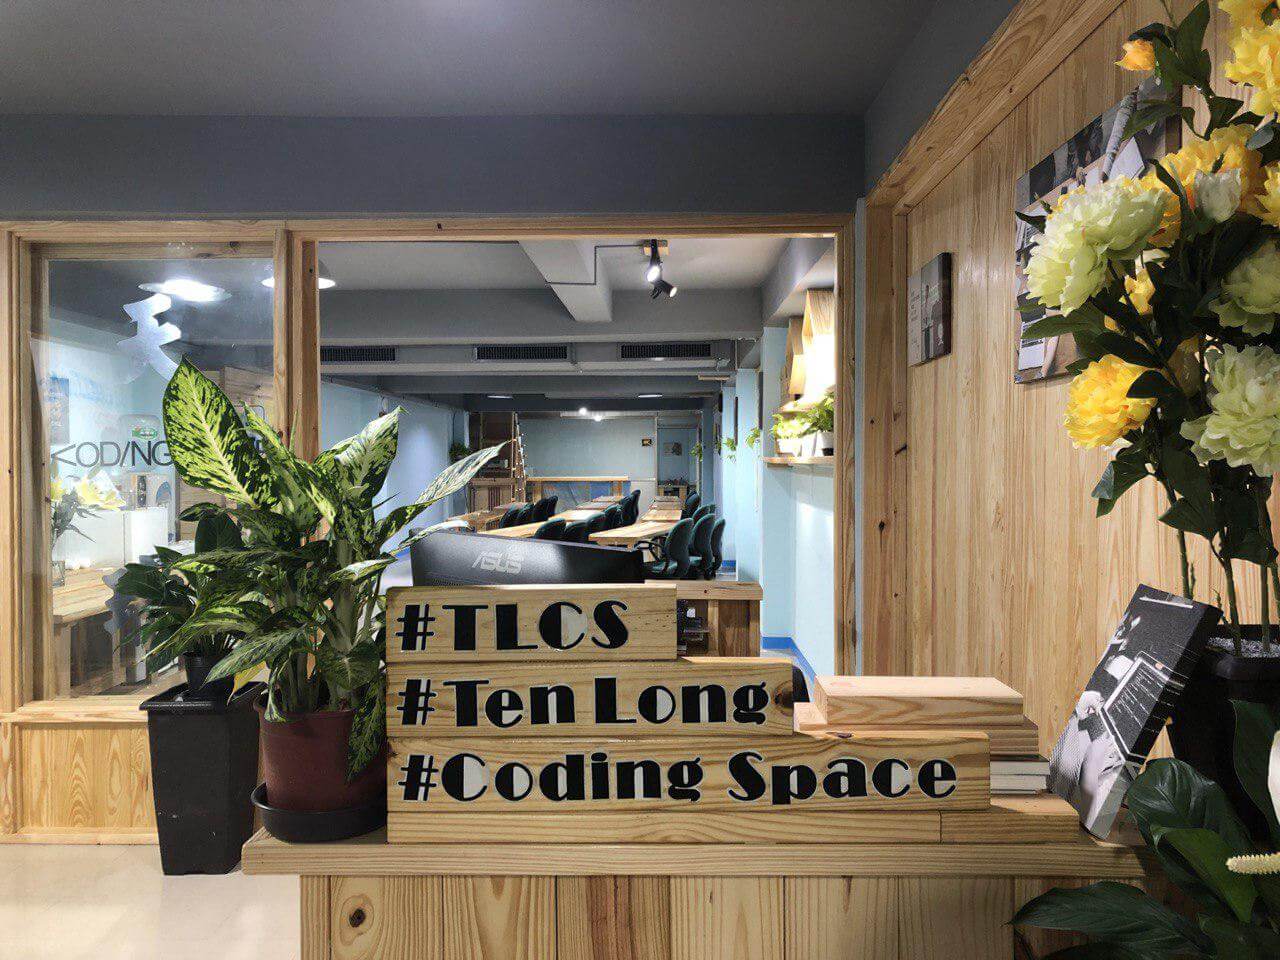 Coding Space